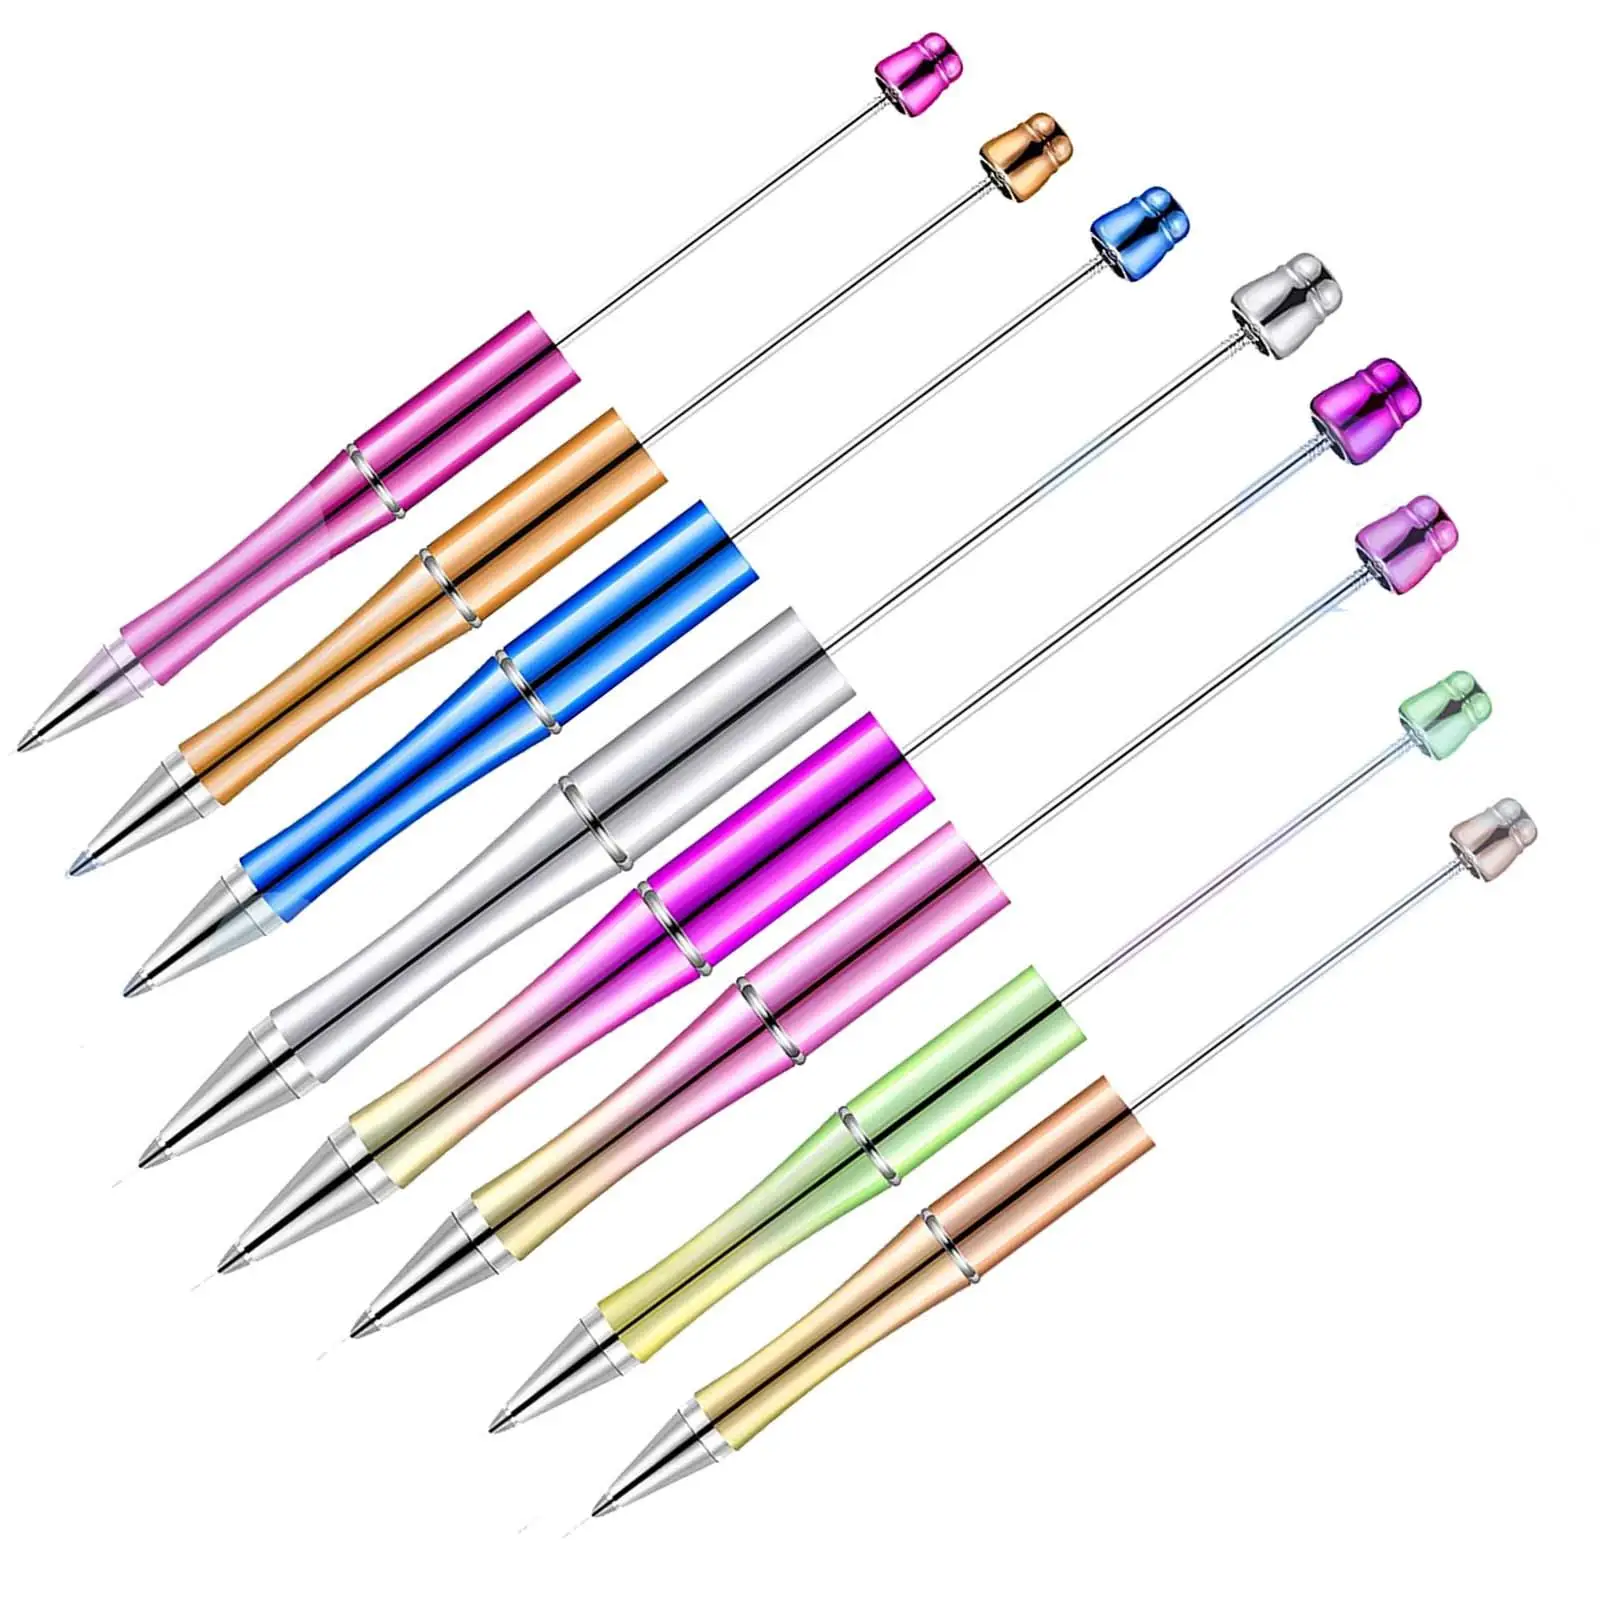 8 Pieces Rollerball Pen DIY Creative 1mm Printable Portable Assorted Colors Bead Pens for Taking Notes Draw Exam Writing Office